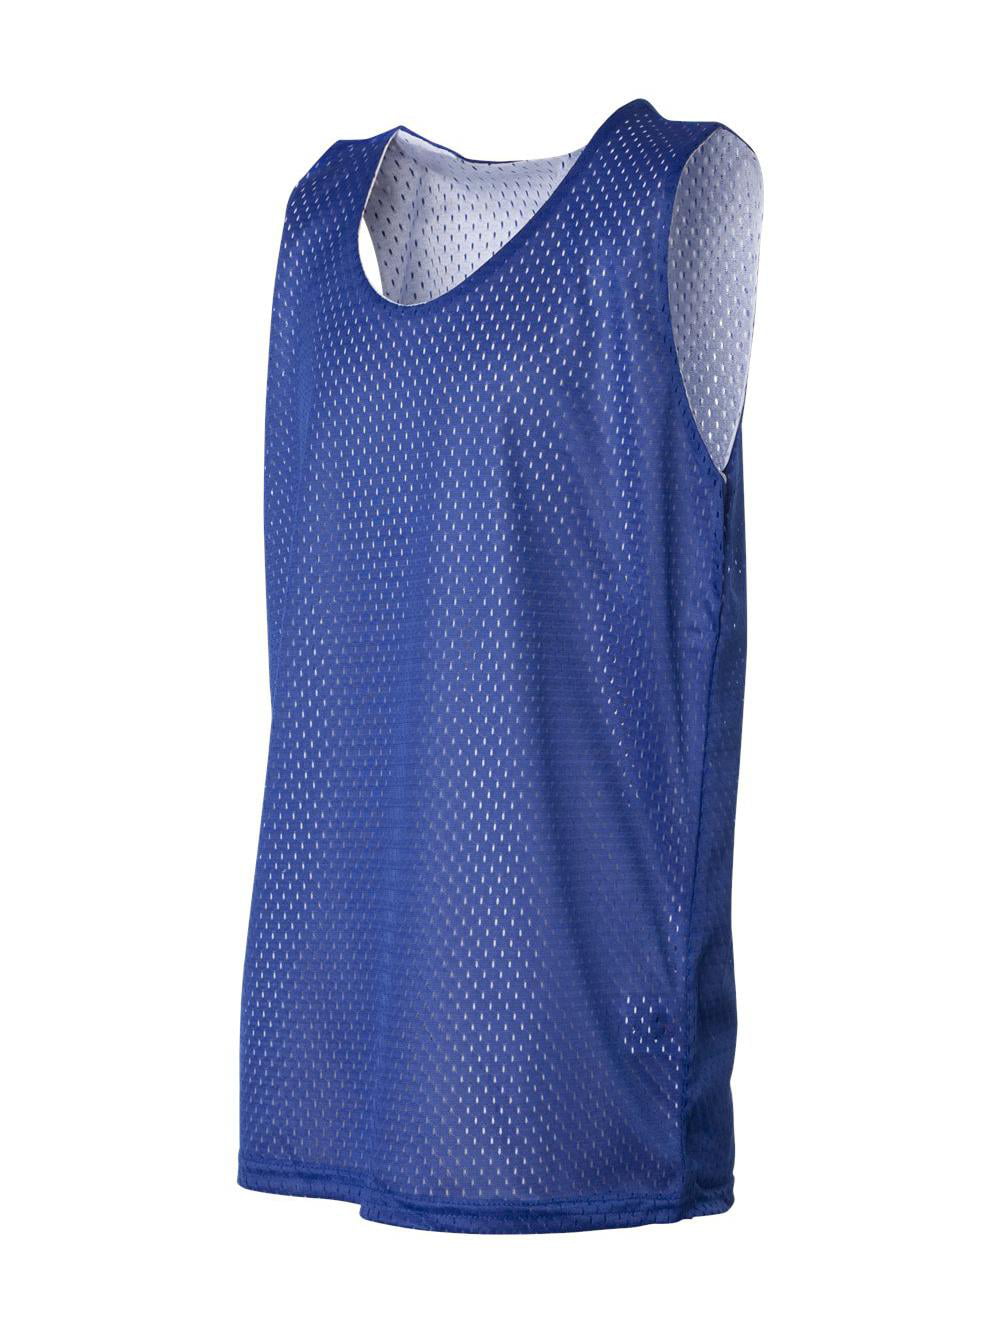 Details about   Badger Youth Pro Mesh Reversible Tank Top 2529 